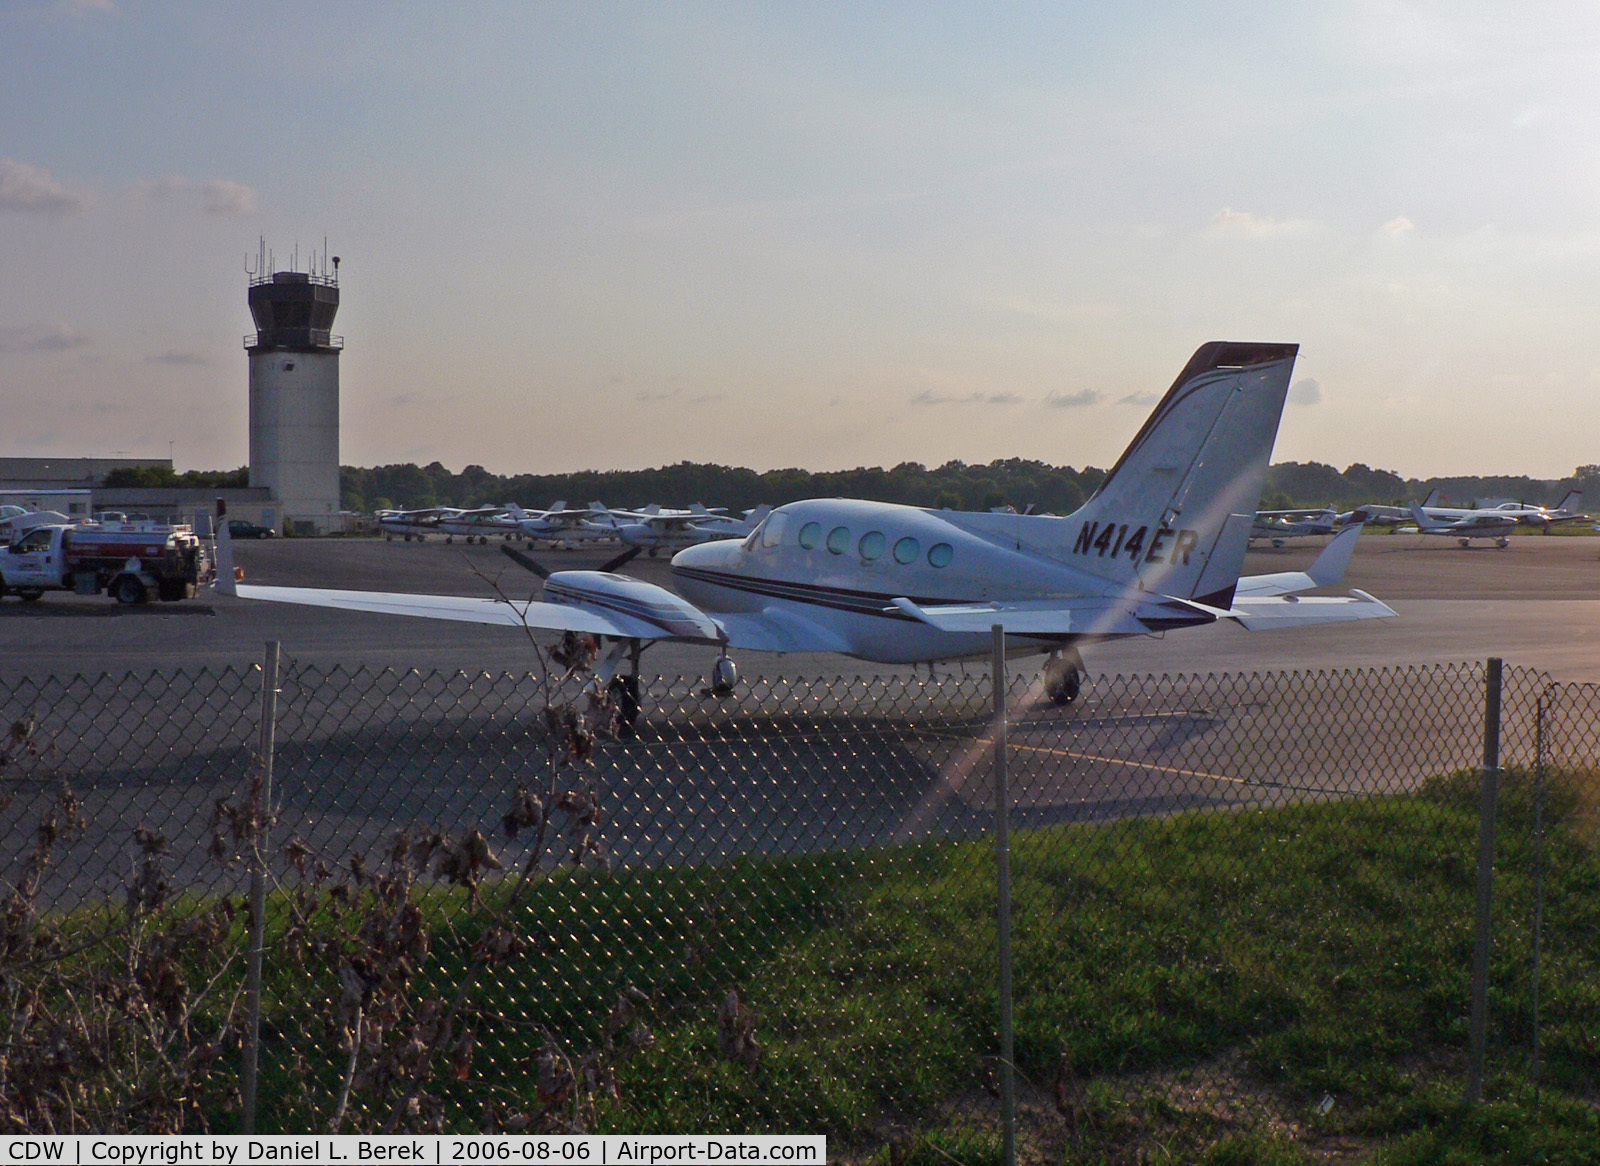 Essex County Airport (CDW) - Essex County - Caldwell Airport serves general and business aviation aircraft in northeastern New jersey.